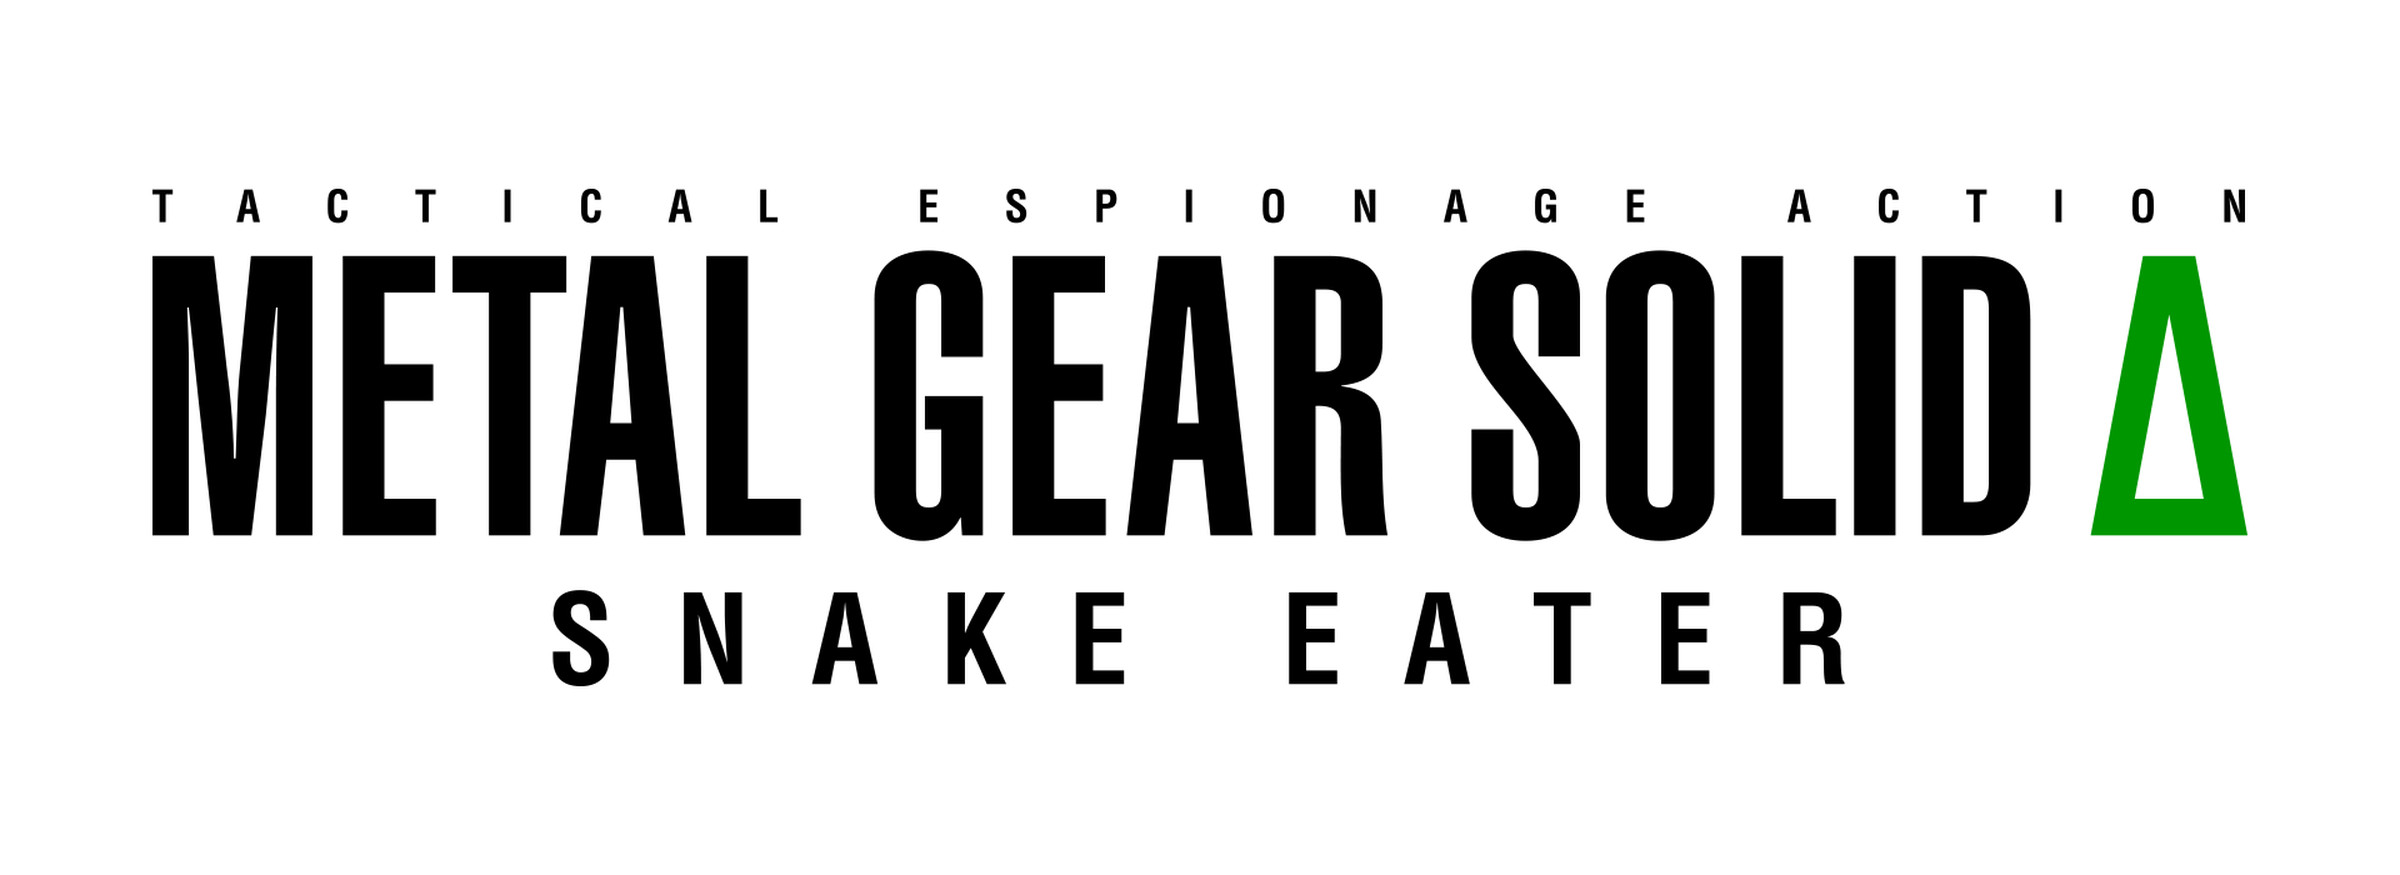 The logo for Metal Gear Solid Delta: Snake Eater.